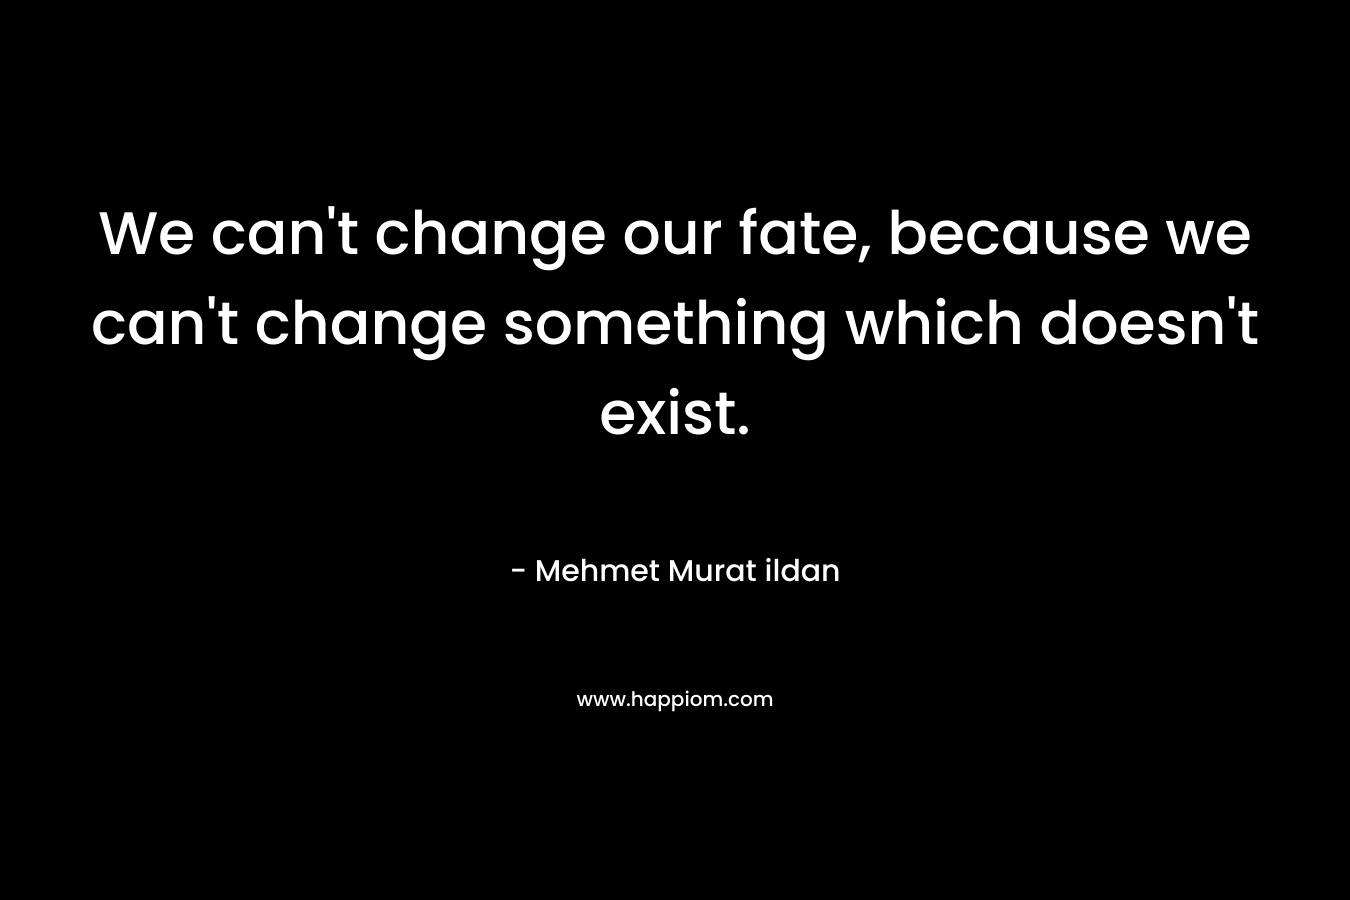 We can't change our fate, because we can't change something which doesn't exist.